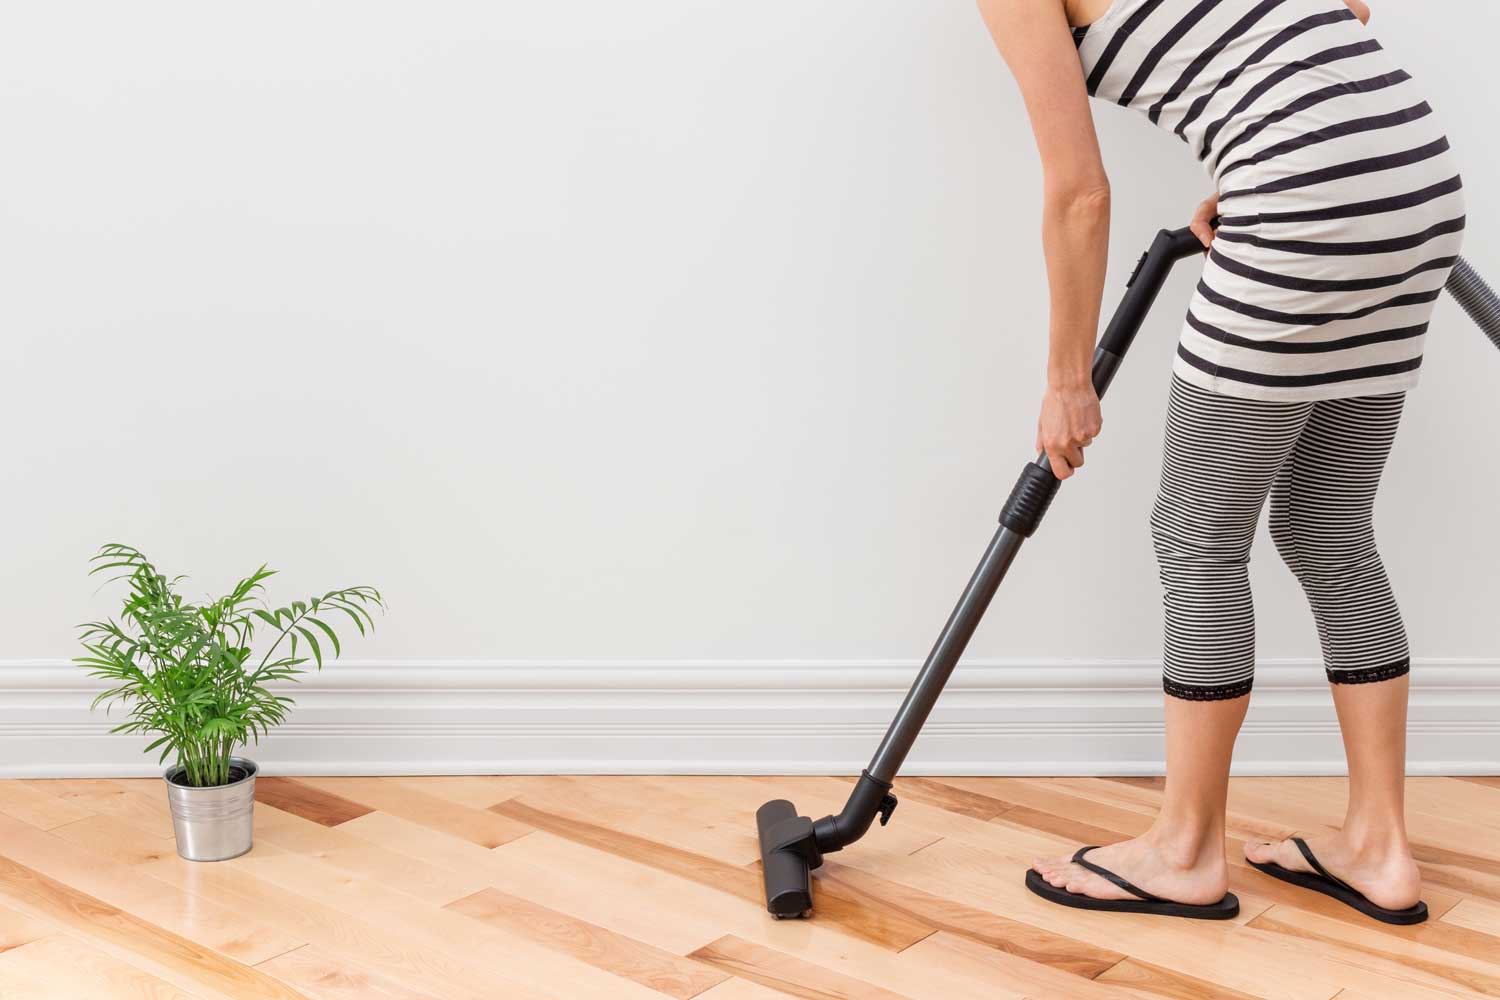 Regulary vacuum or sweep floors to remove dirt and keep your home floors looking amazing - tips from Footprints Floors in Nashville / Brentwood.